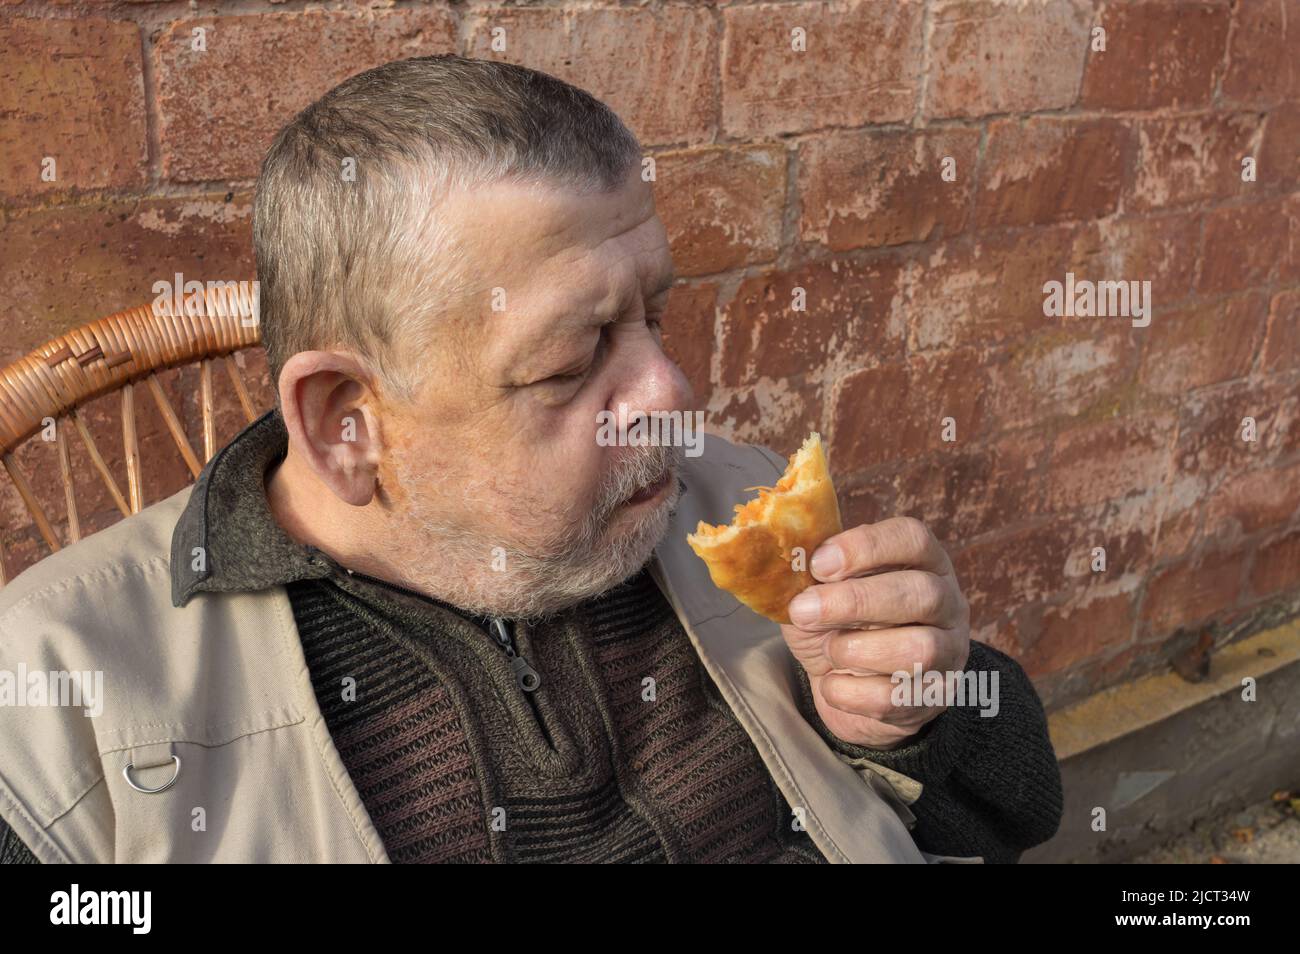 Portrait of Ukainian senior Sitting agaist brick wall and eating patty filled with fried cabbage Stock Photo